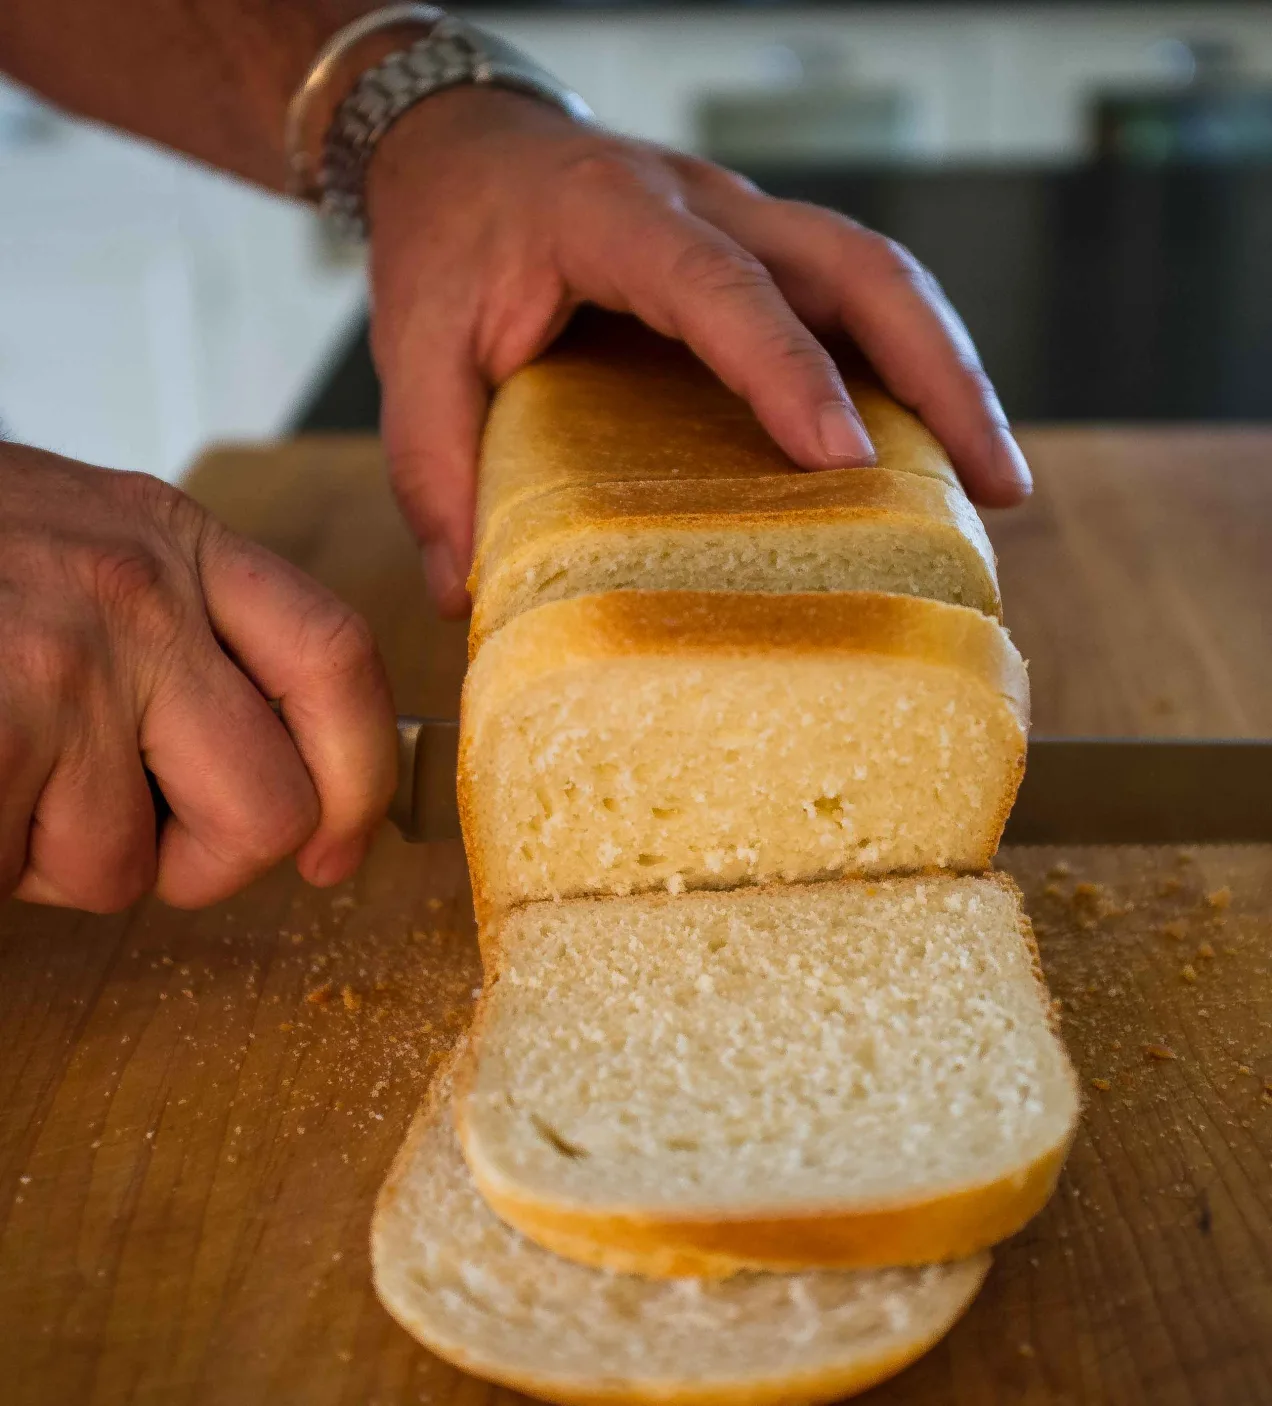 Which bread is a crusty, tangy bread made with a fermented dough?